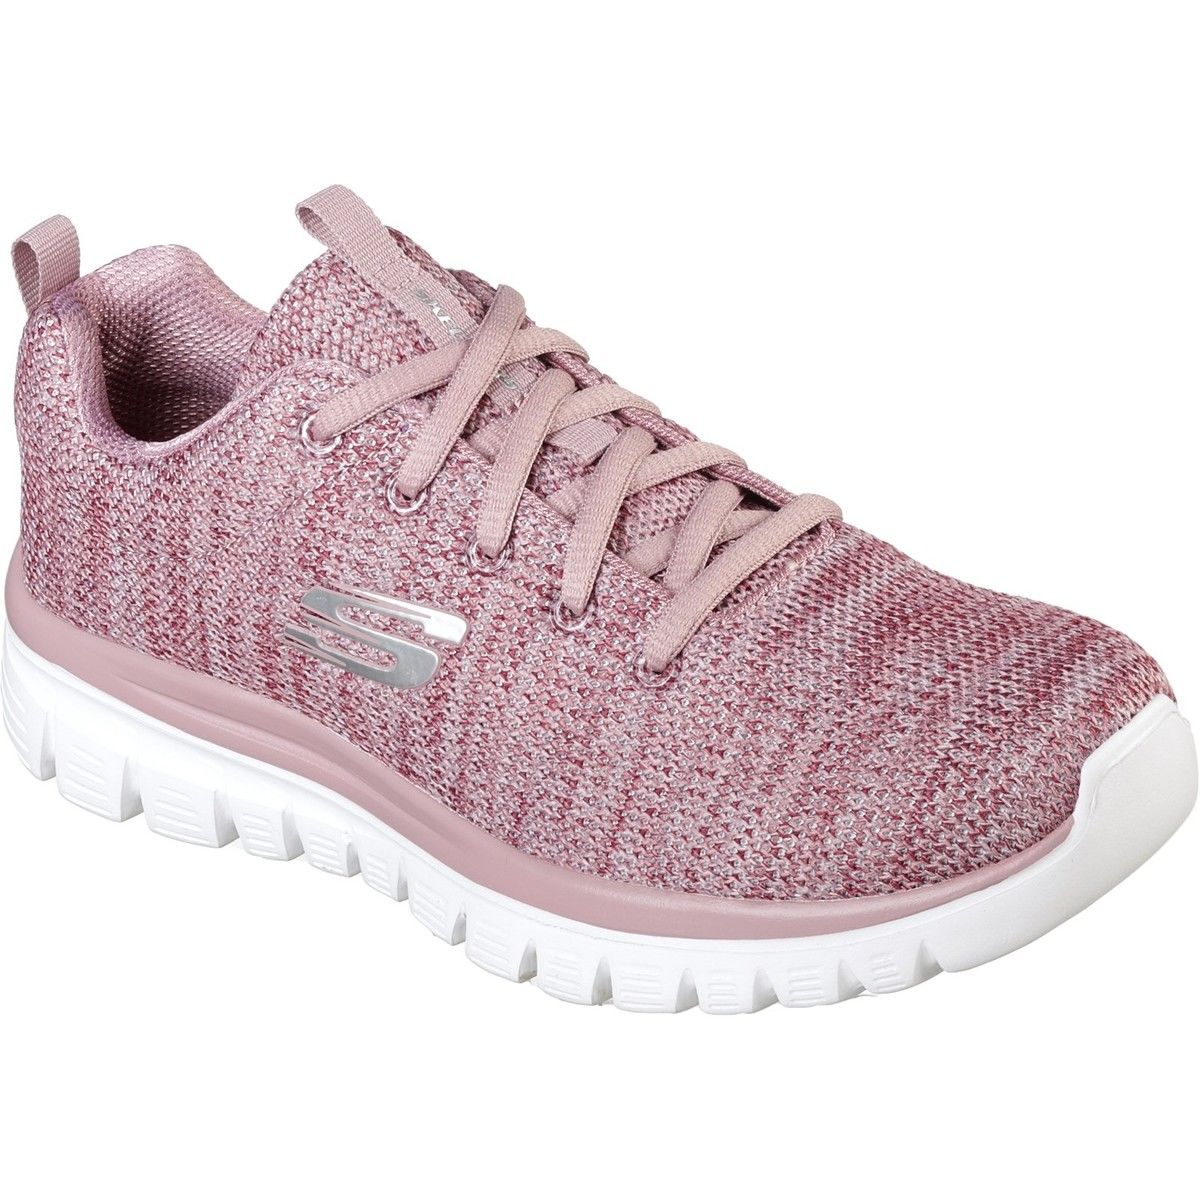 Skechers Graceful Twisted Fortune MVE Mauve Womens trainers in a Plain Textile in Size 3